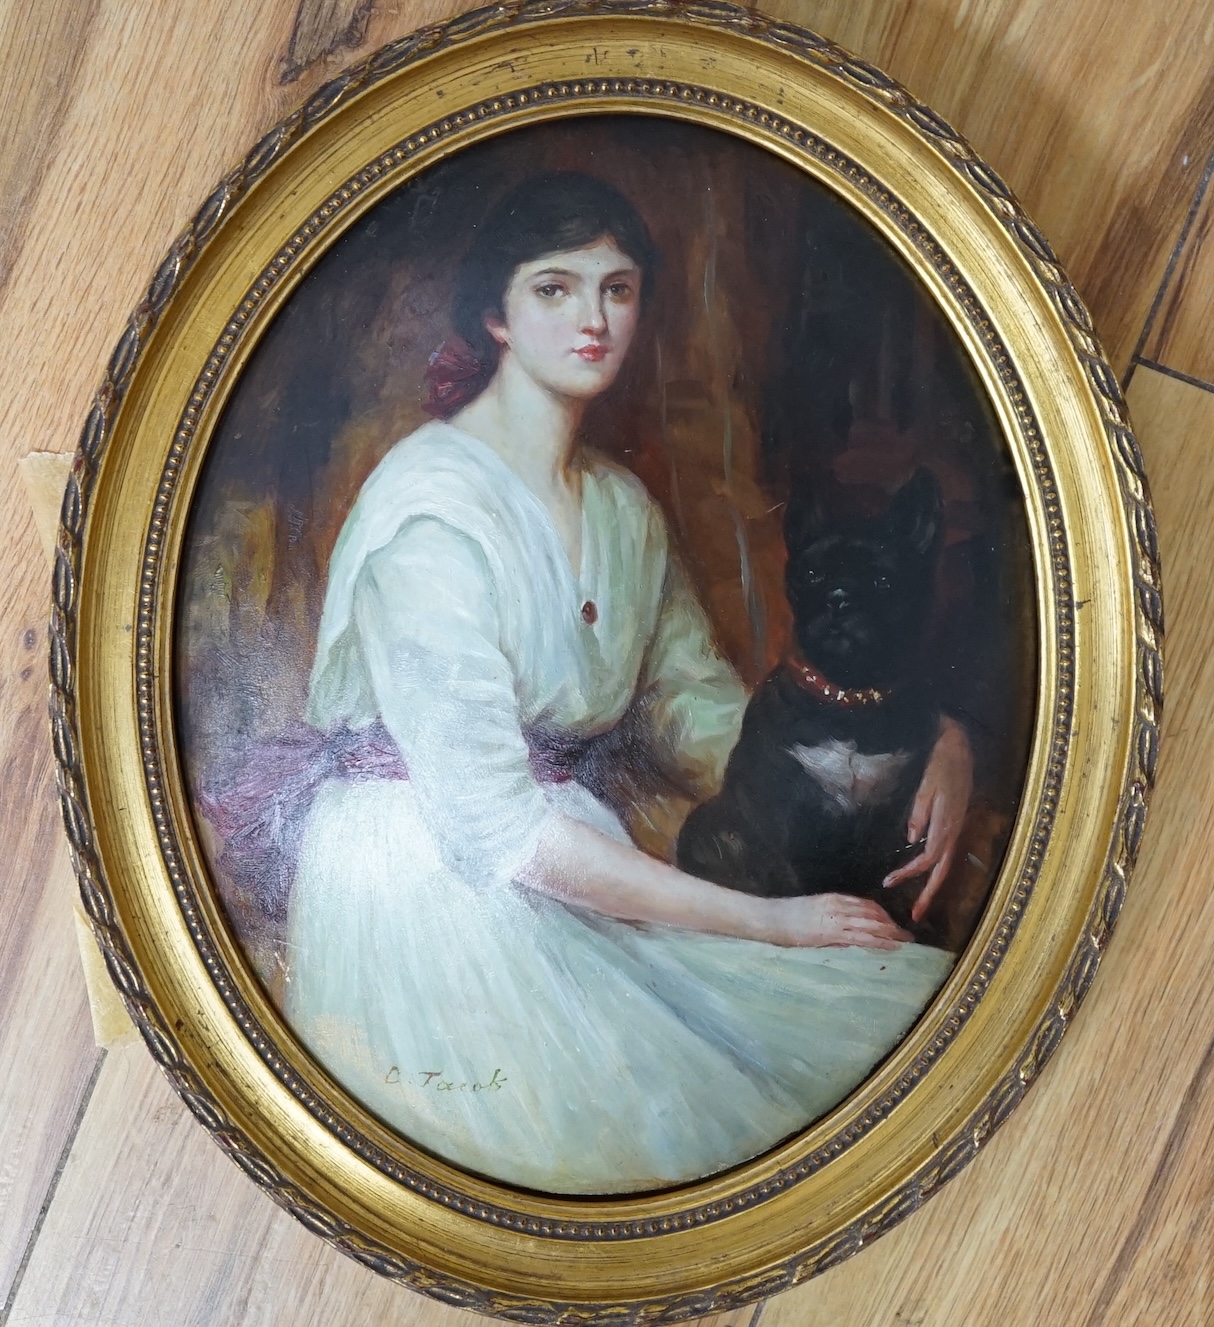 F. Jacob, oval oil on moulded composition, Study of a young lady with a dog, signed, 24 x 19cm, gilt frame. Condition - fair to good